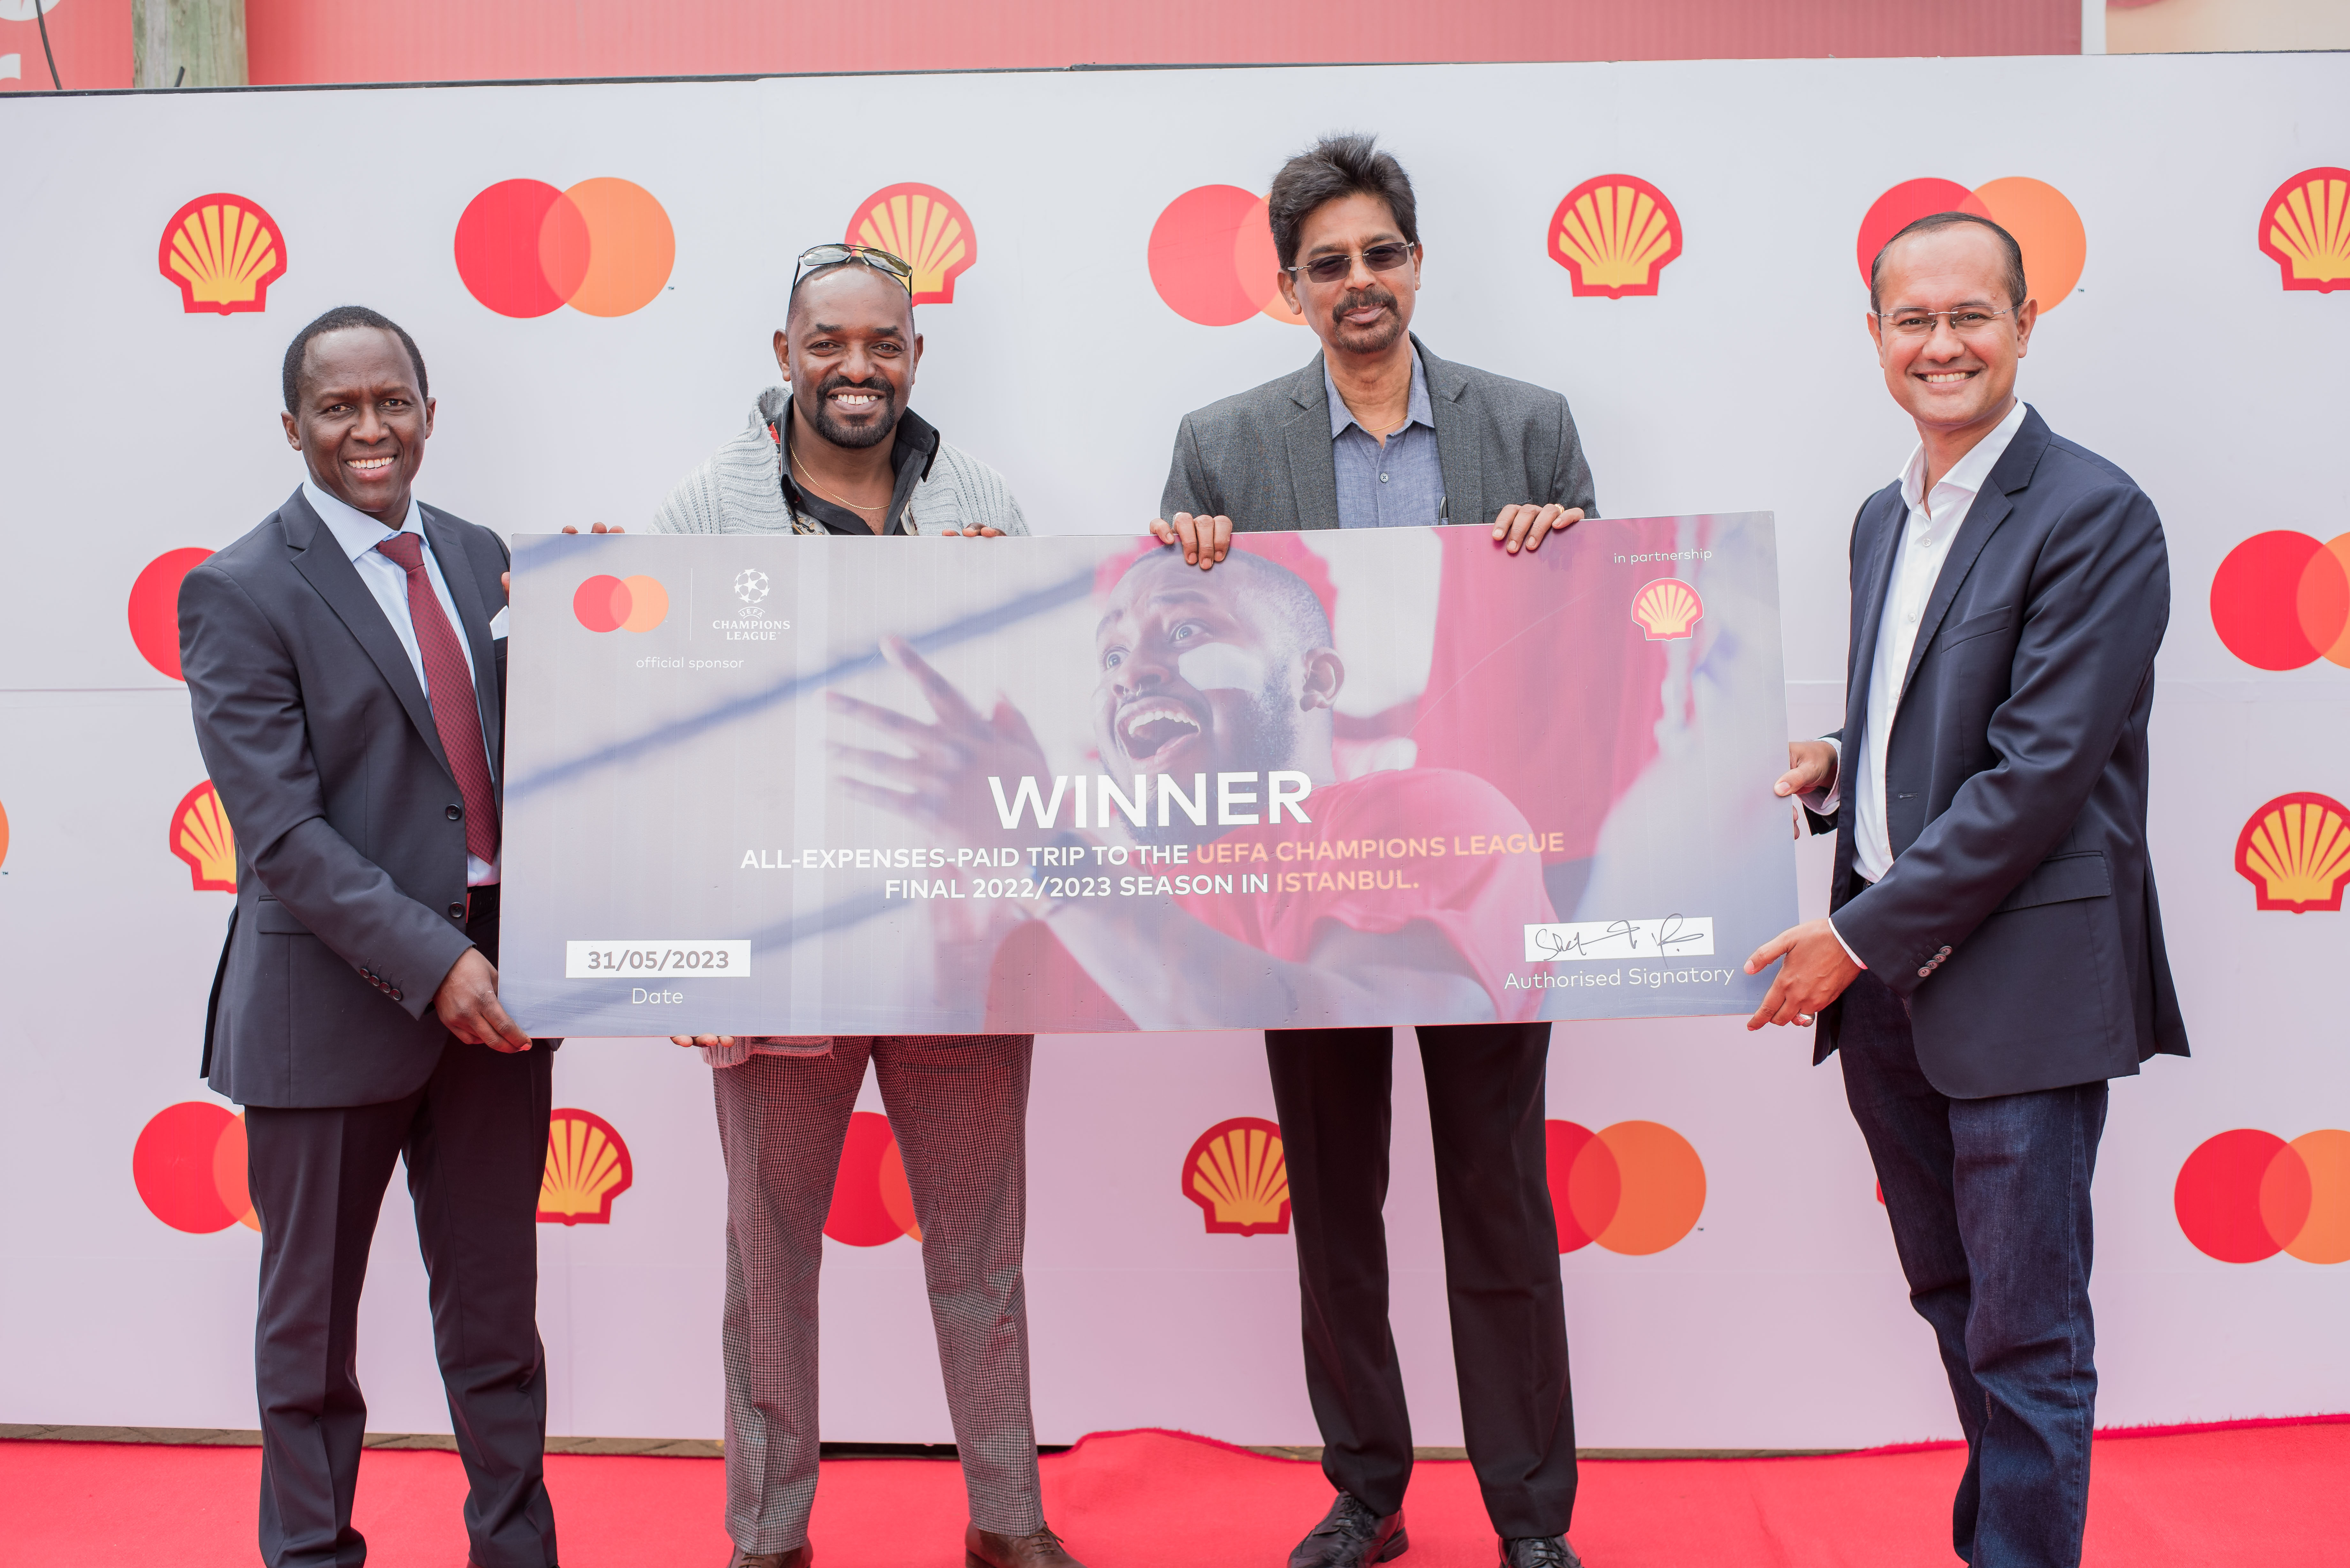 Photo caption: Peter Murungi, Managing Director of Vivo Energy Kenya (Left) and Shehryar Ali, Country Manager for East Africa at Mastercard (Right) with the two lucky winners Raymond Nyambisa (Centre Left) and Jaison Jose (Centre Right). The two have won an all-expenses paid trip to watch the UEFA Champions League Finals in Istanbul, Turkey following a month-long campaign by Mastercard and Vivo Energy.